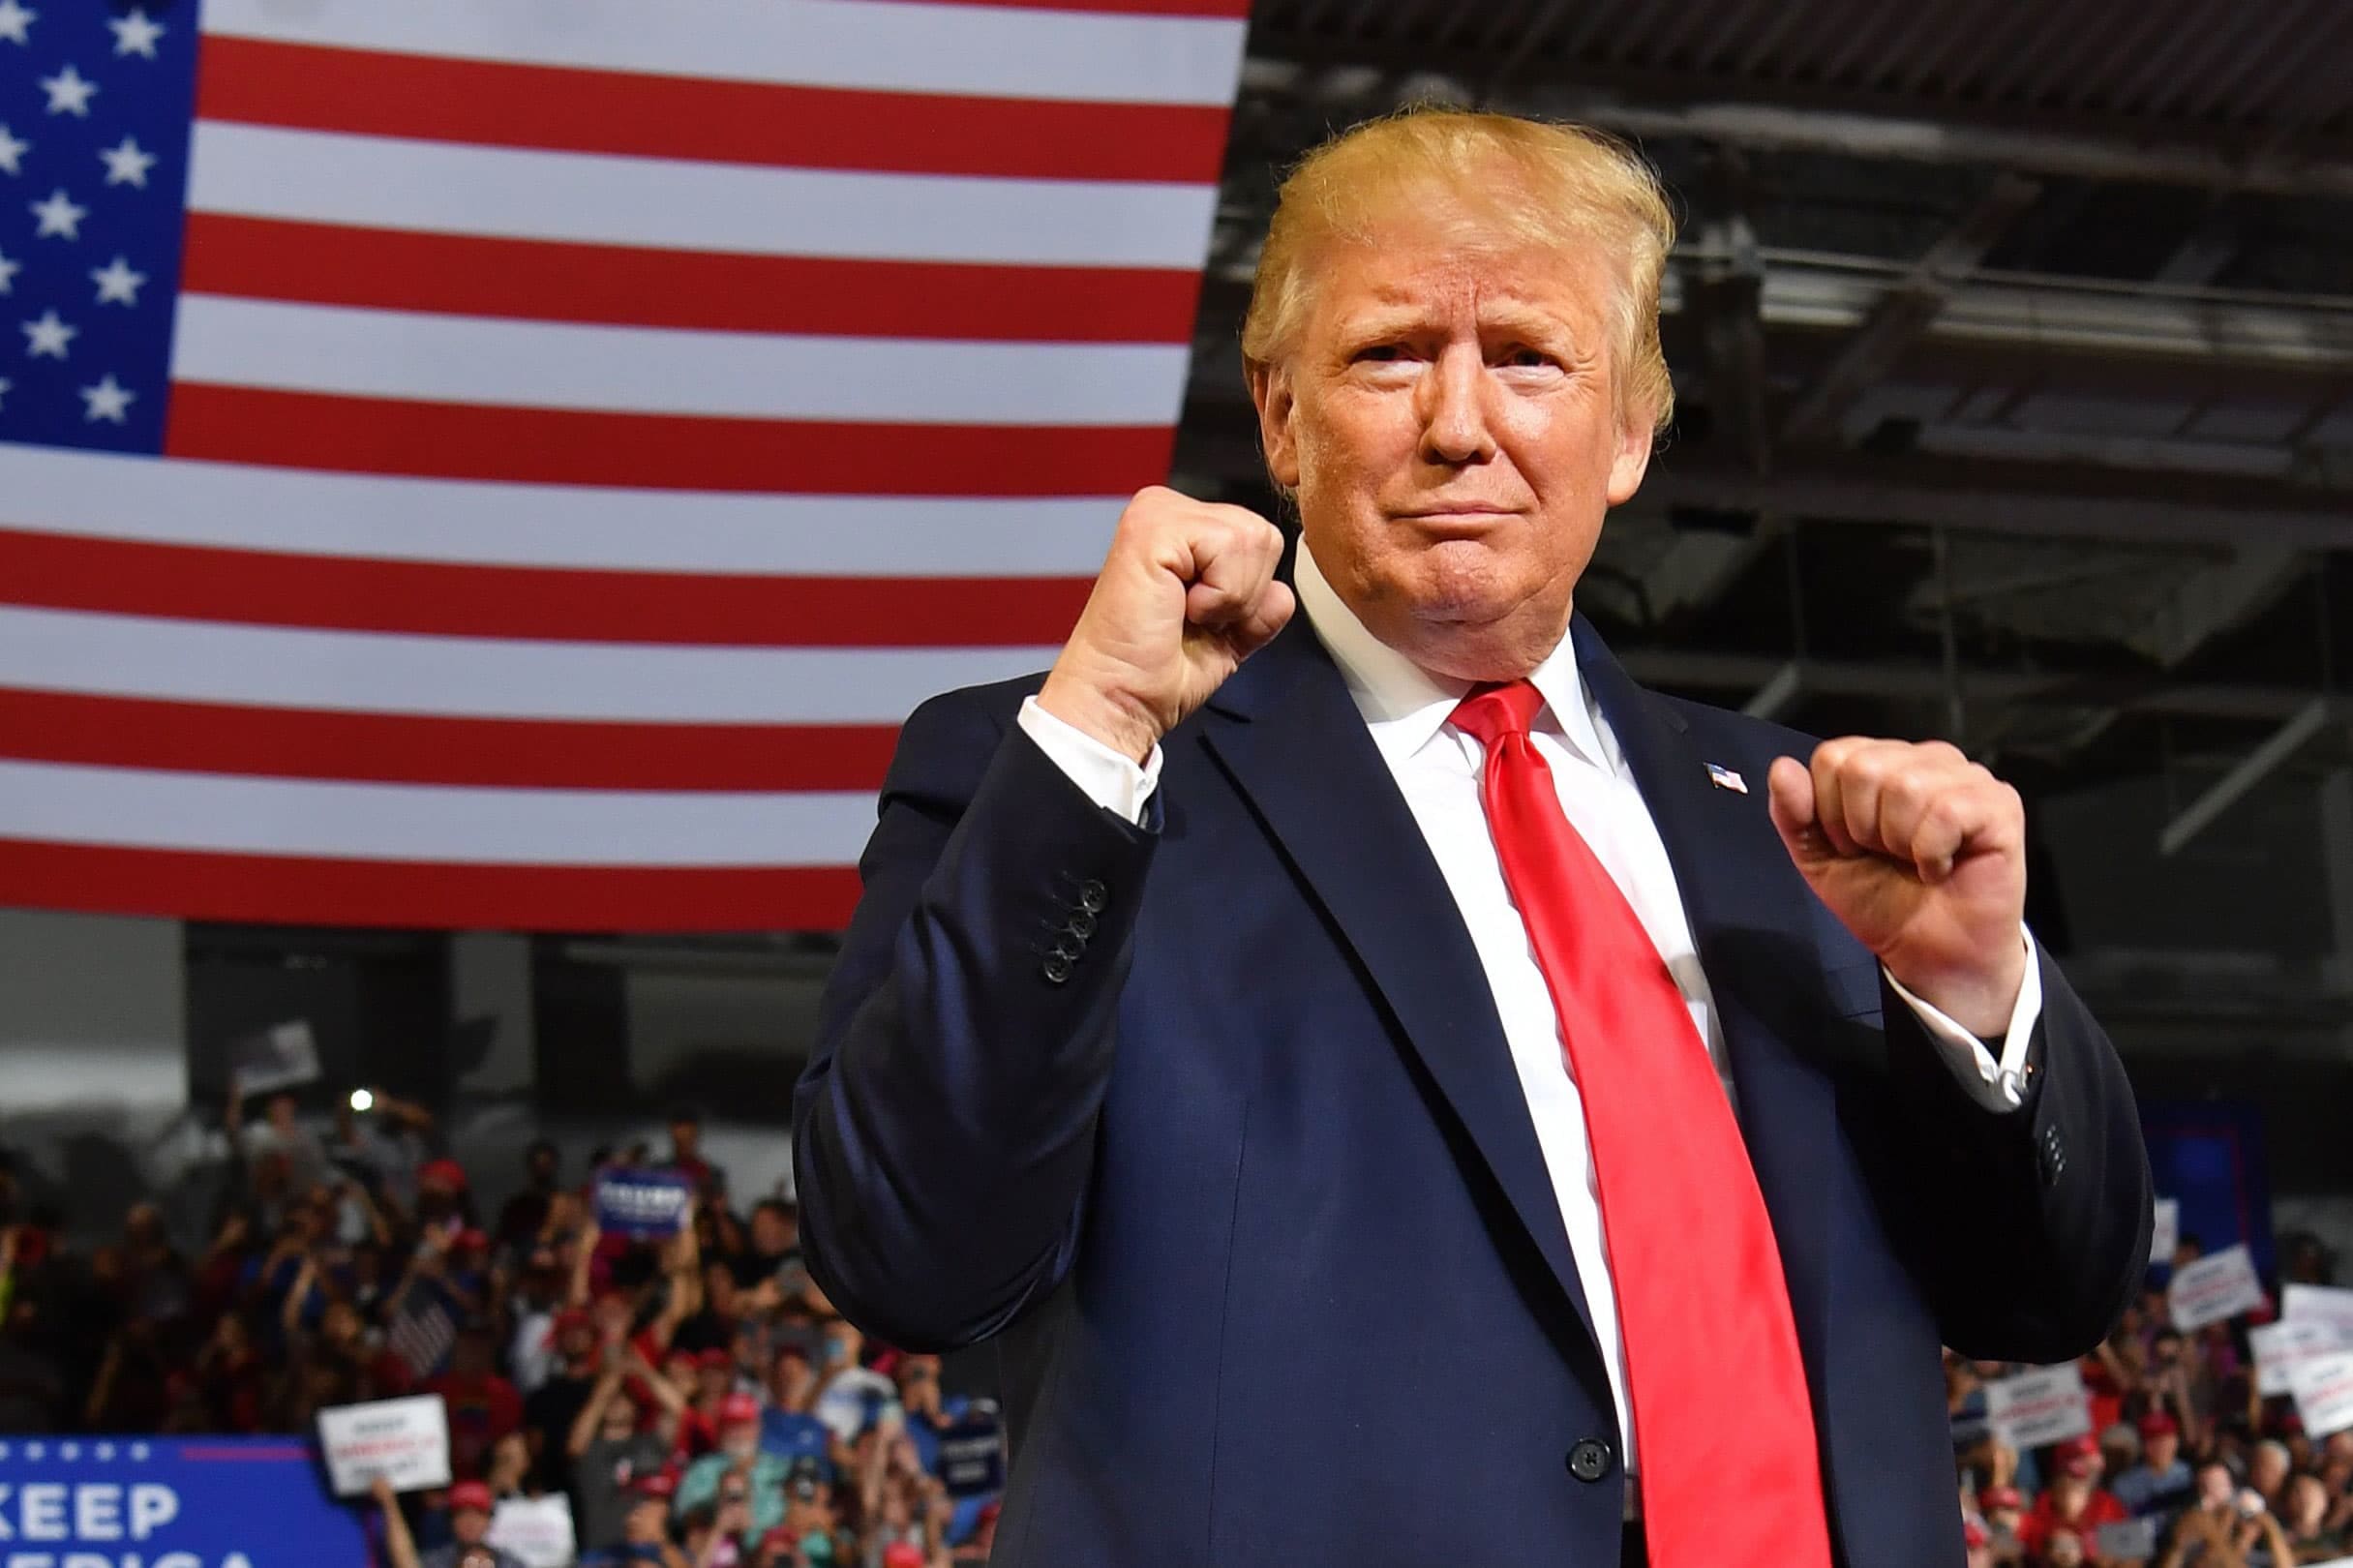 VICTORY: New Hampshire Smacks Down Effort to Keep Trump Off the Ballot in 2024 | The Gateway Pundit